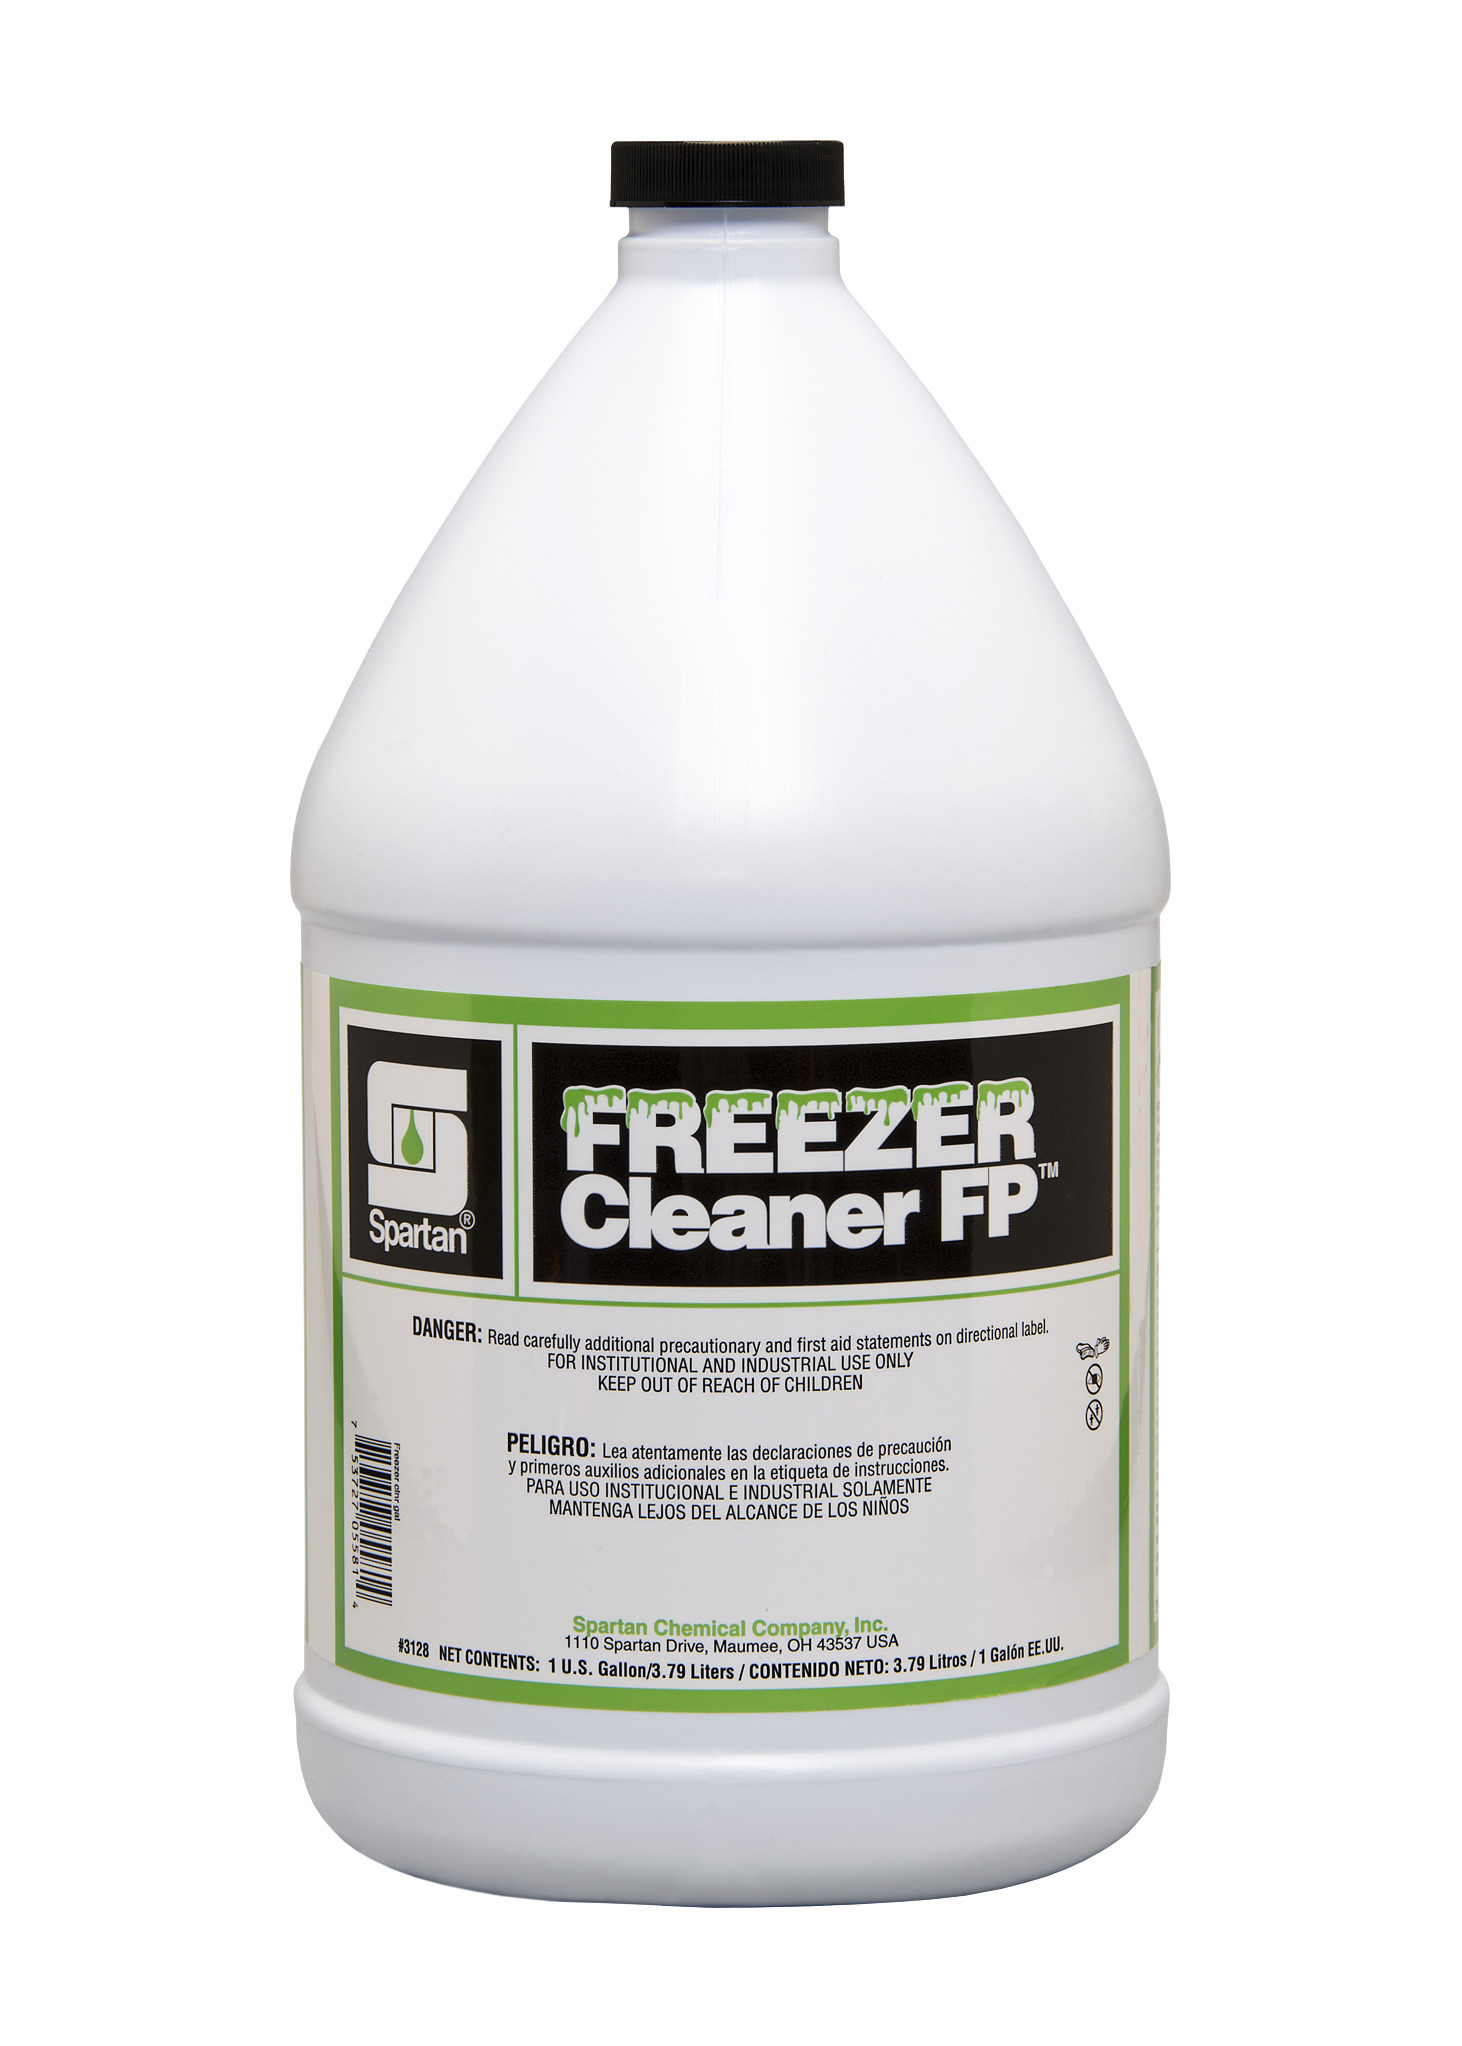 Spartan Chemical Company Freezer Cleaner FP, 1 Gallon